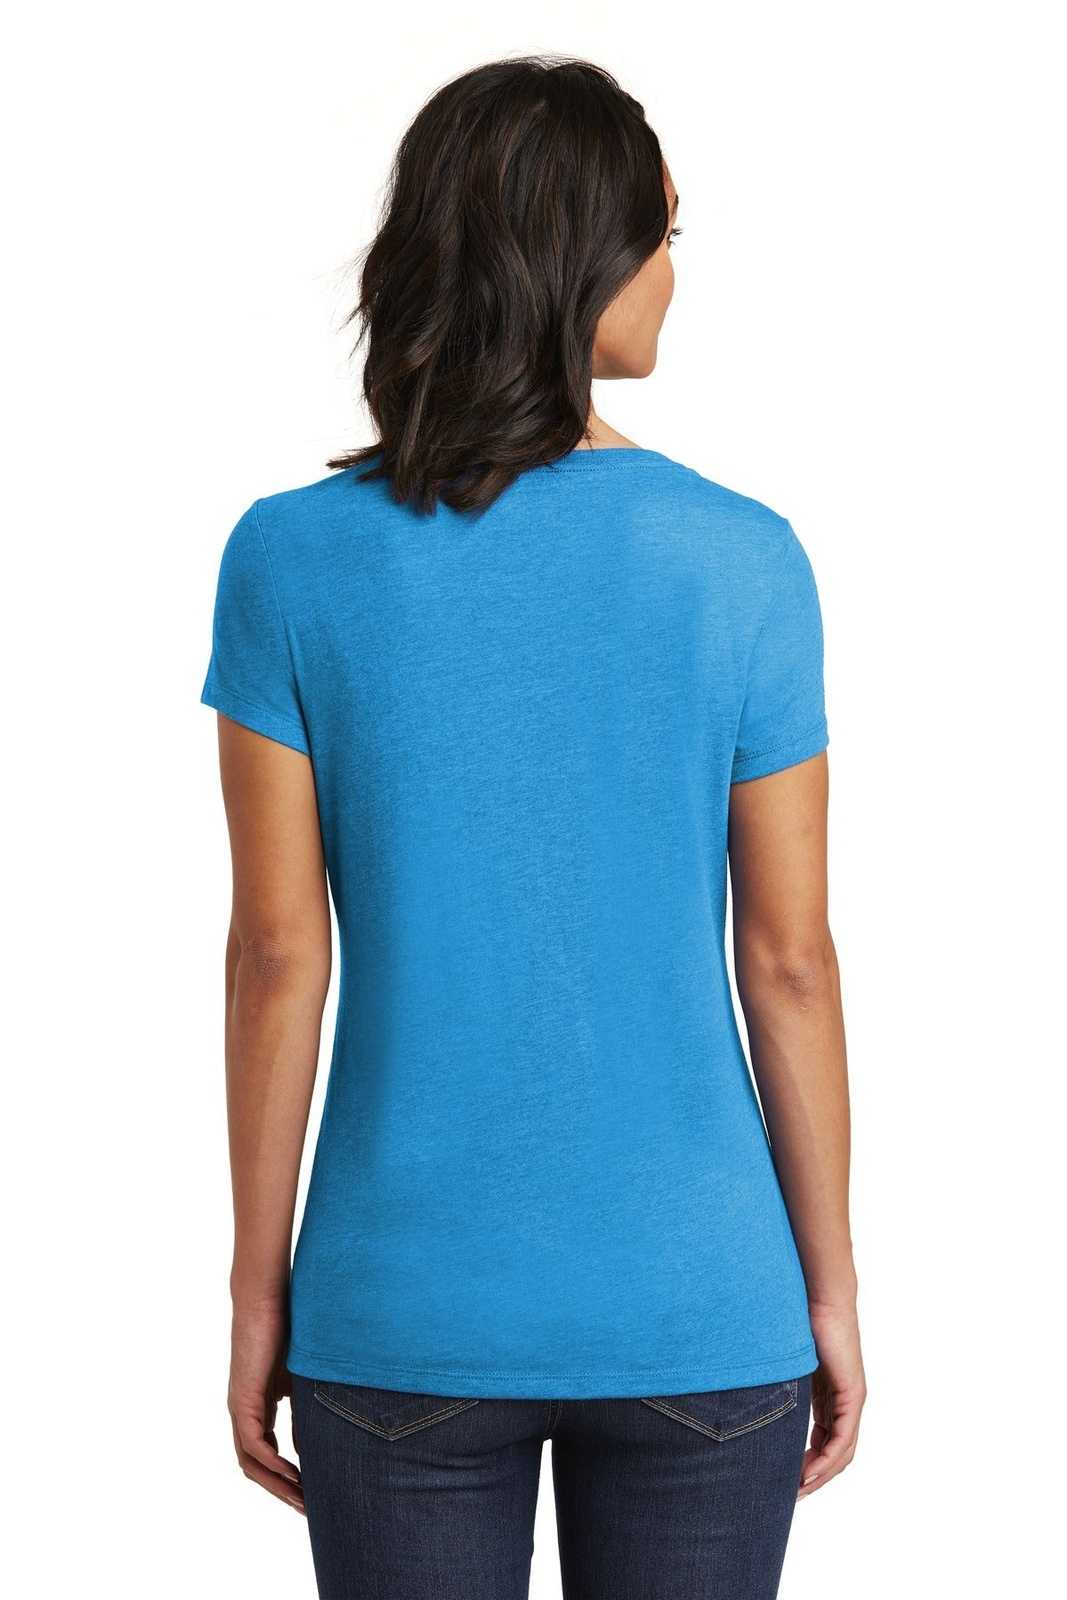 District DT6503 Women's Very Important Tee V-Neck - Heathered Bright Turquoise - HIT a Double - 1